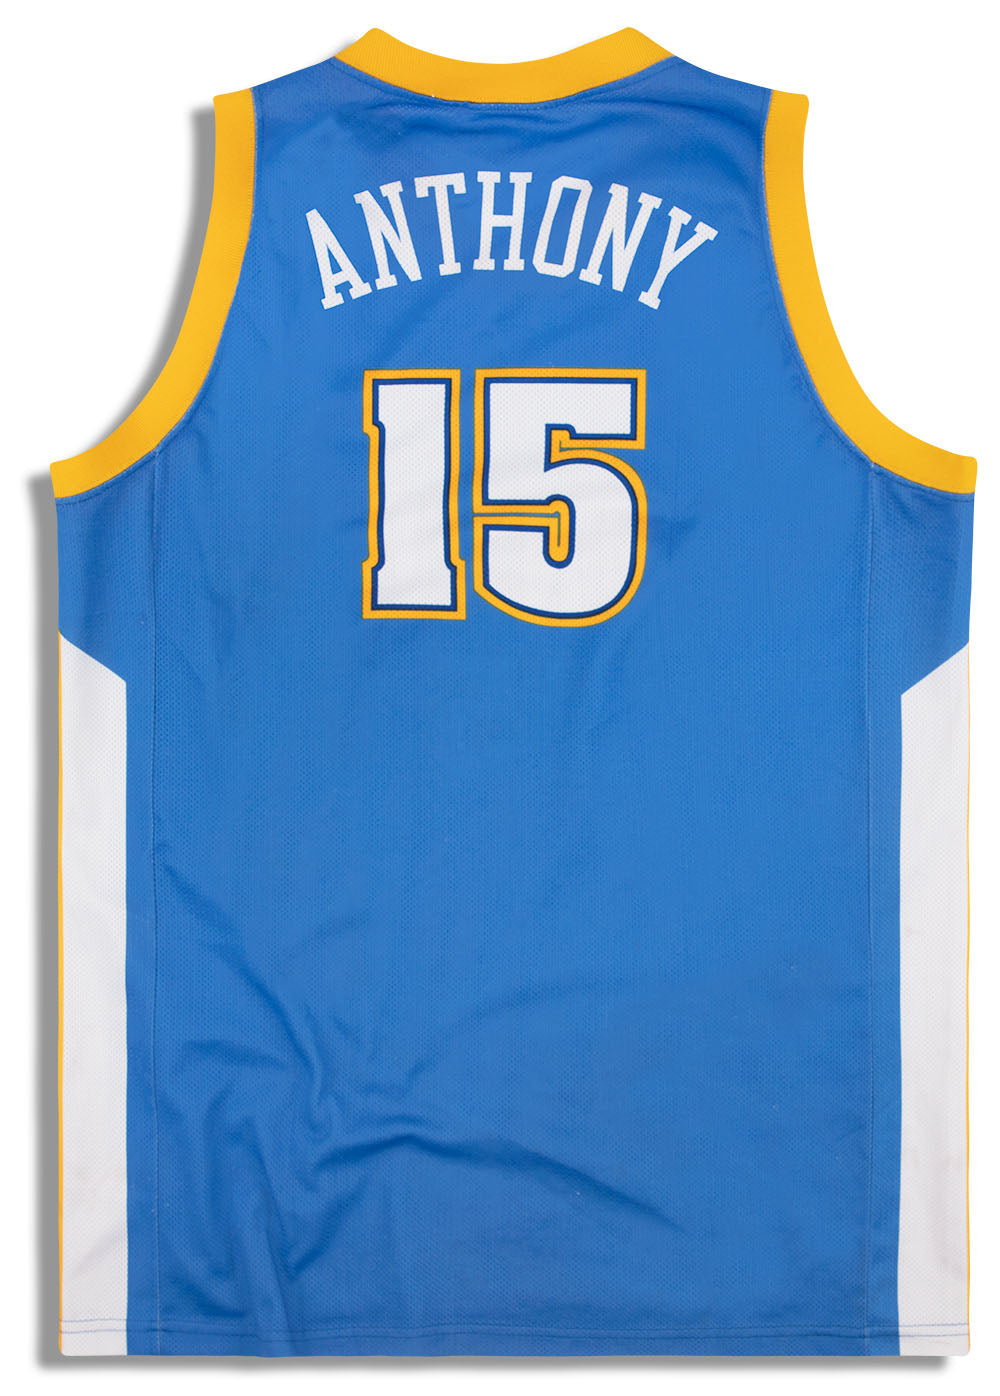 2003-10 DENVER NUGGETS ANTHONY #15 CHAMPION JERSEY (AWAY) XL